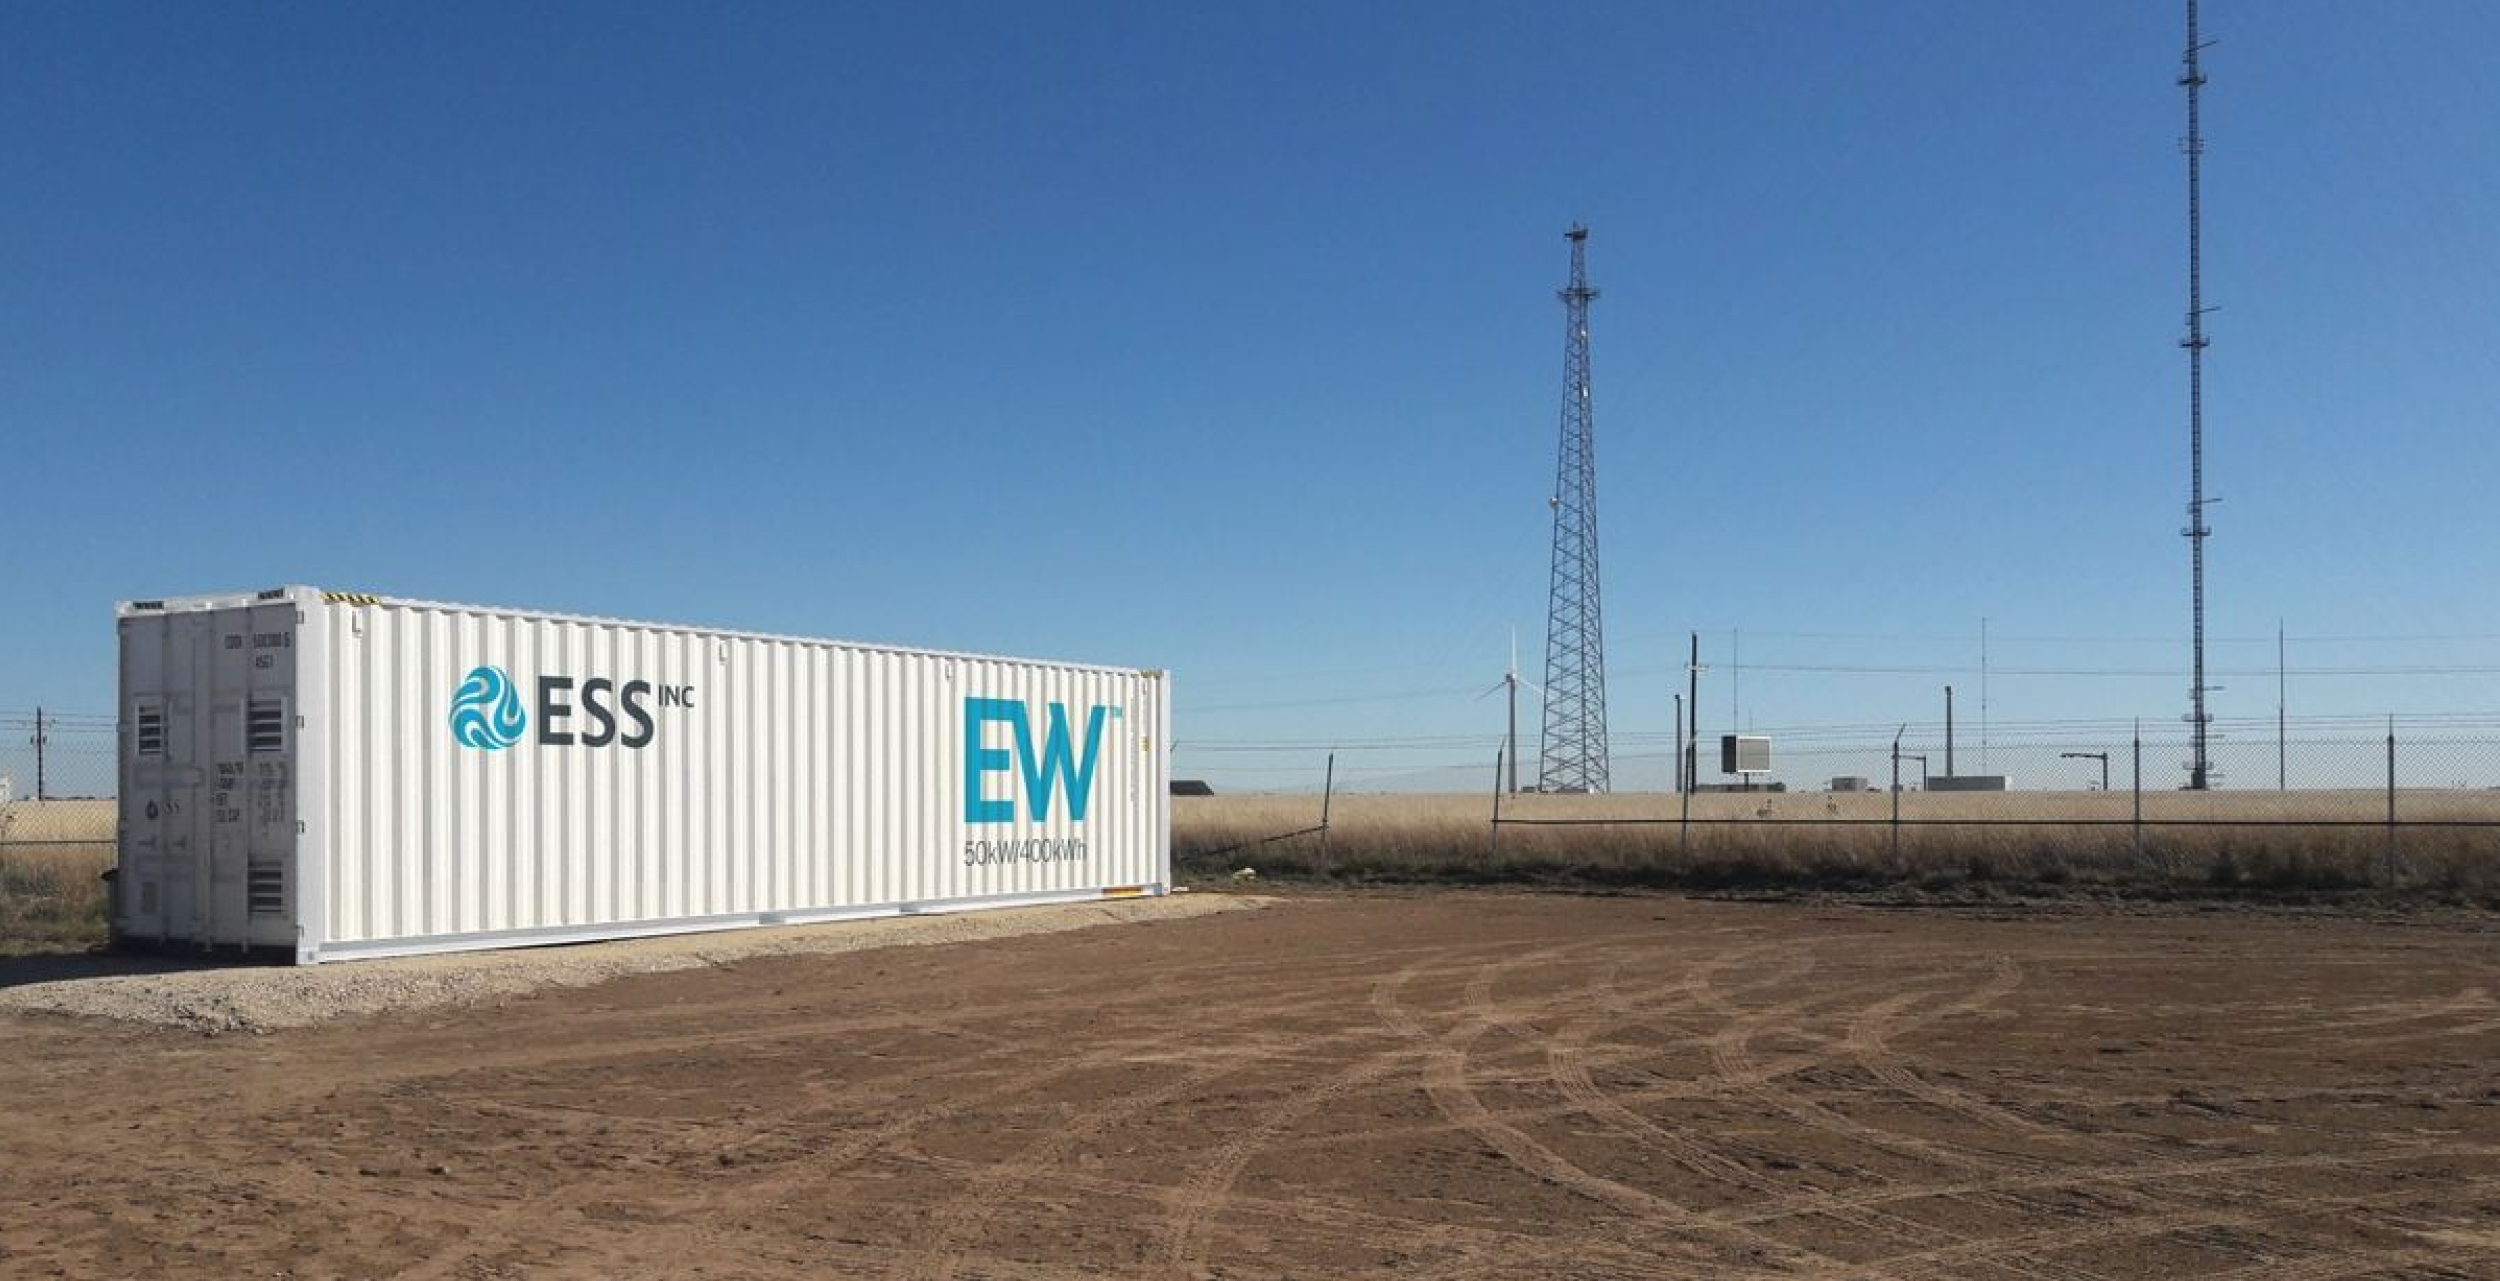 ESS, SB Energy reach major deal for flow battery technology with 2 GWh agreement (Utility Dive)